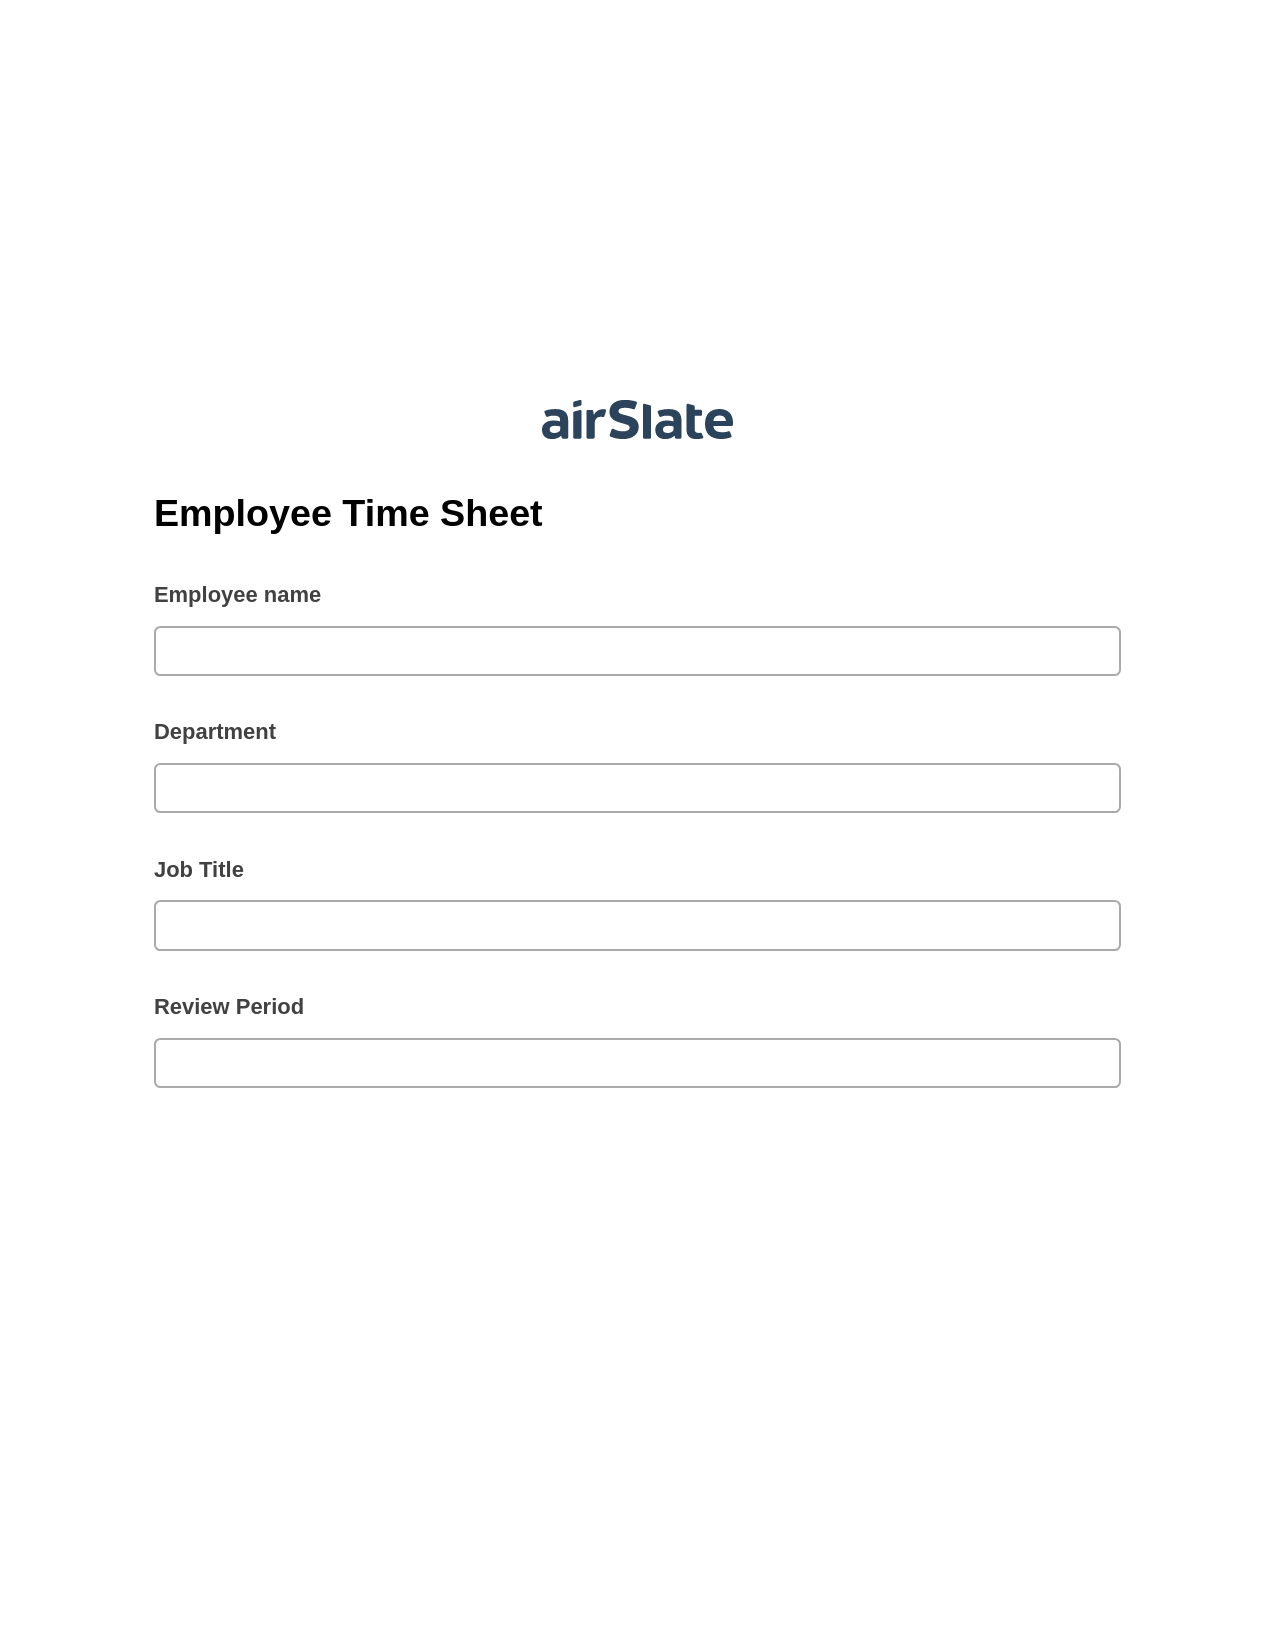 Multirole Employee Time Sheet Pre-fill from Salesforce Records with SOQL Bot, Open under a Role Bot, Webhook Postfinish Bot